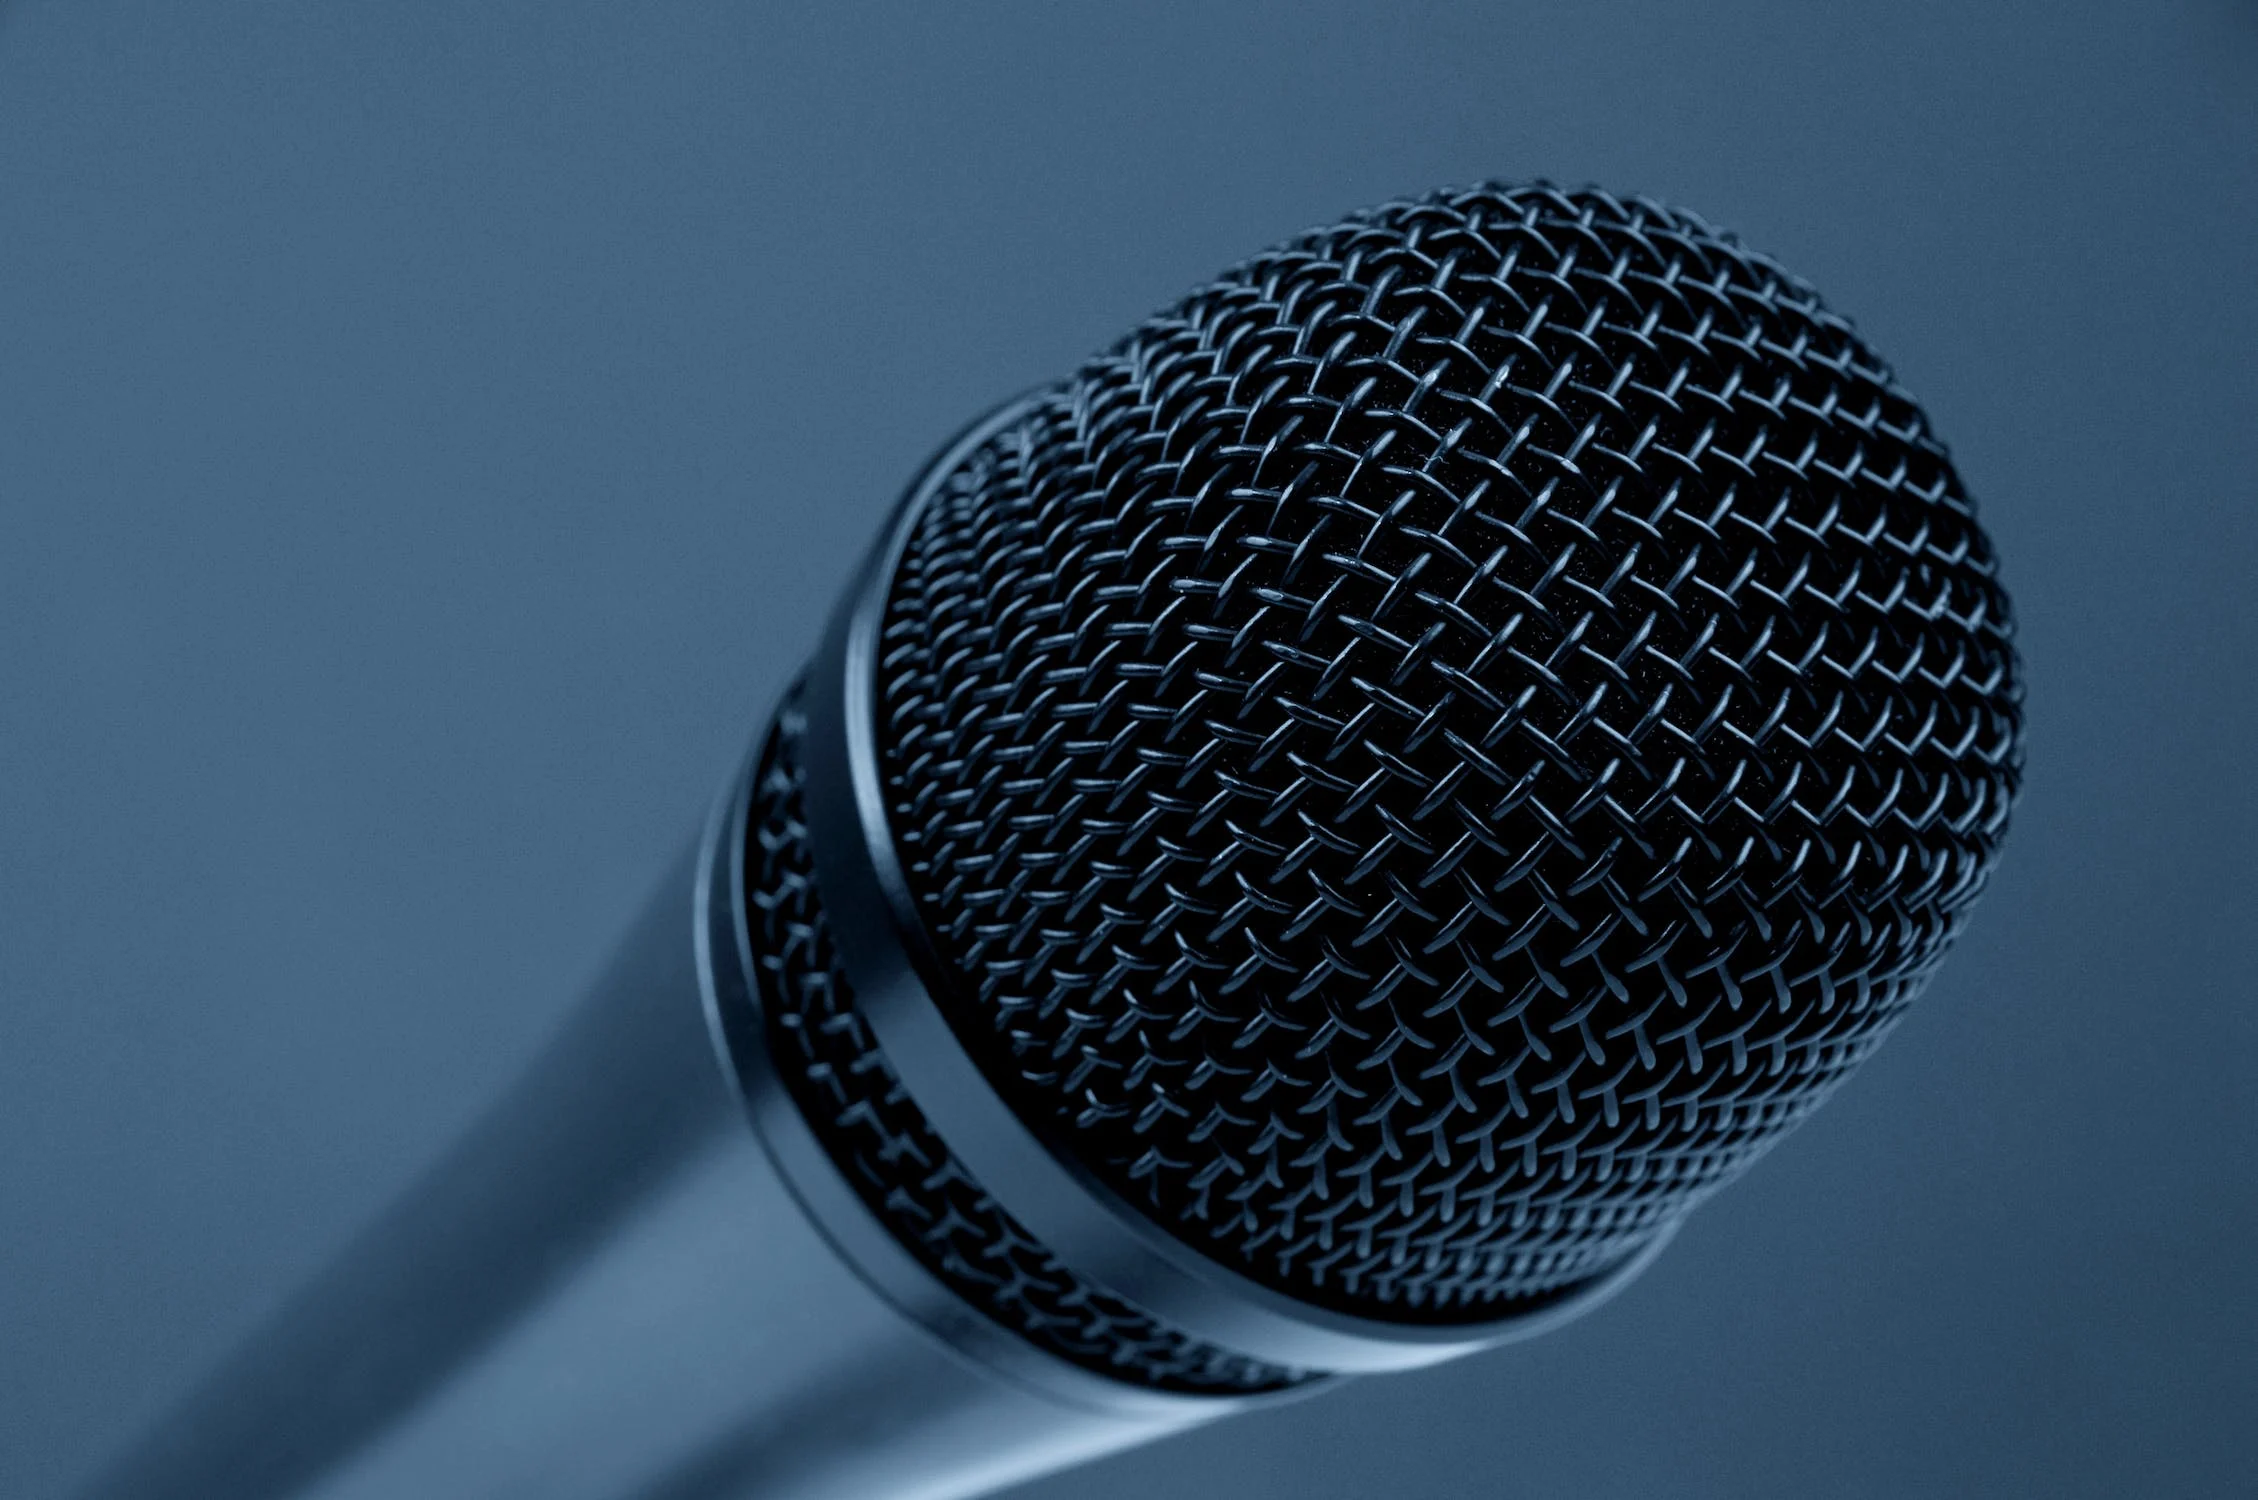 7 tips to Improve Your Public Speaking Skills